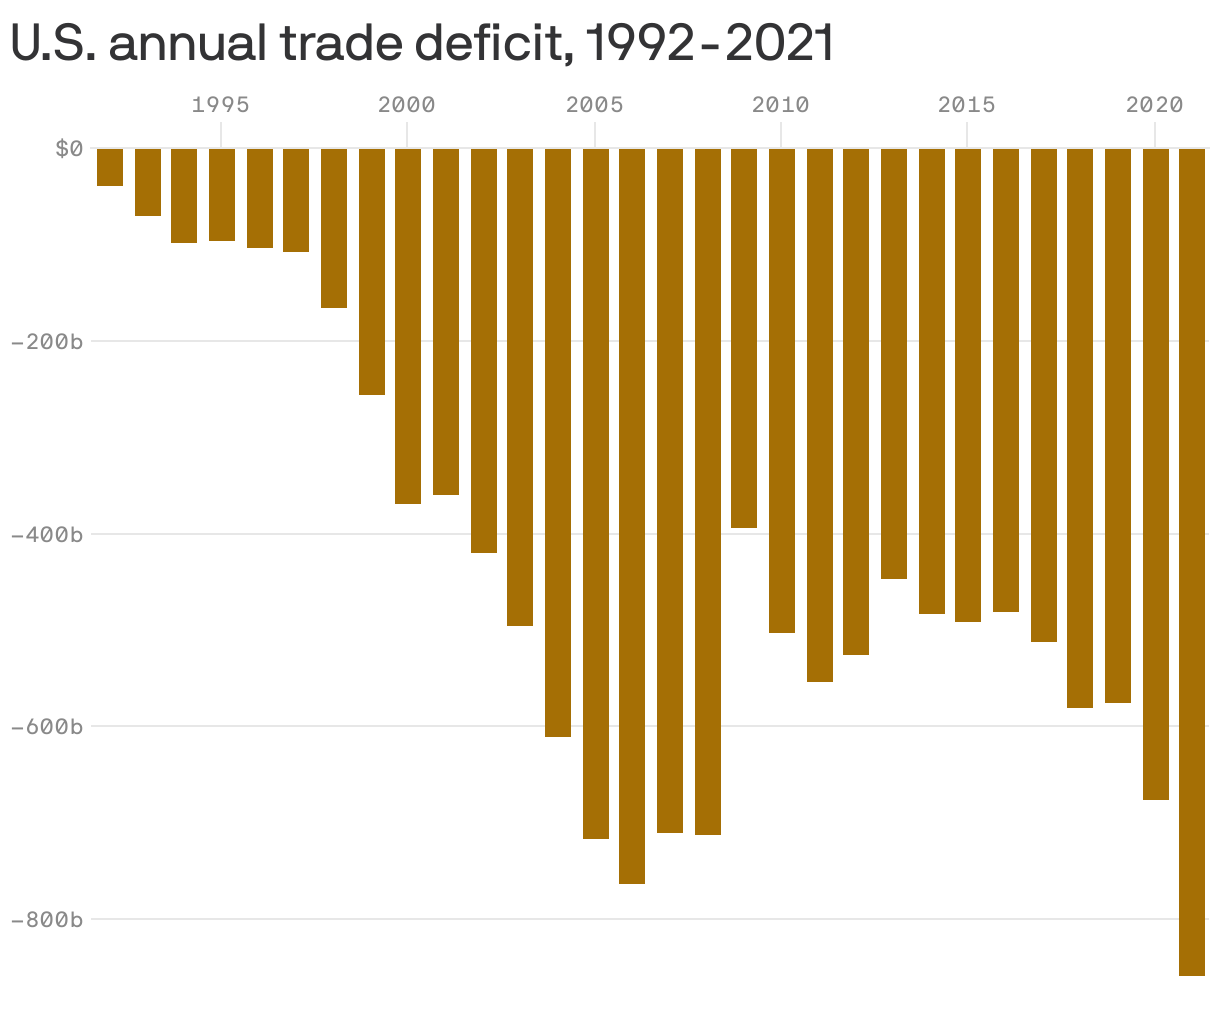 Graph showing U.S. annual trade deficit from 1992 to 2021. 